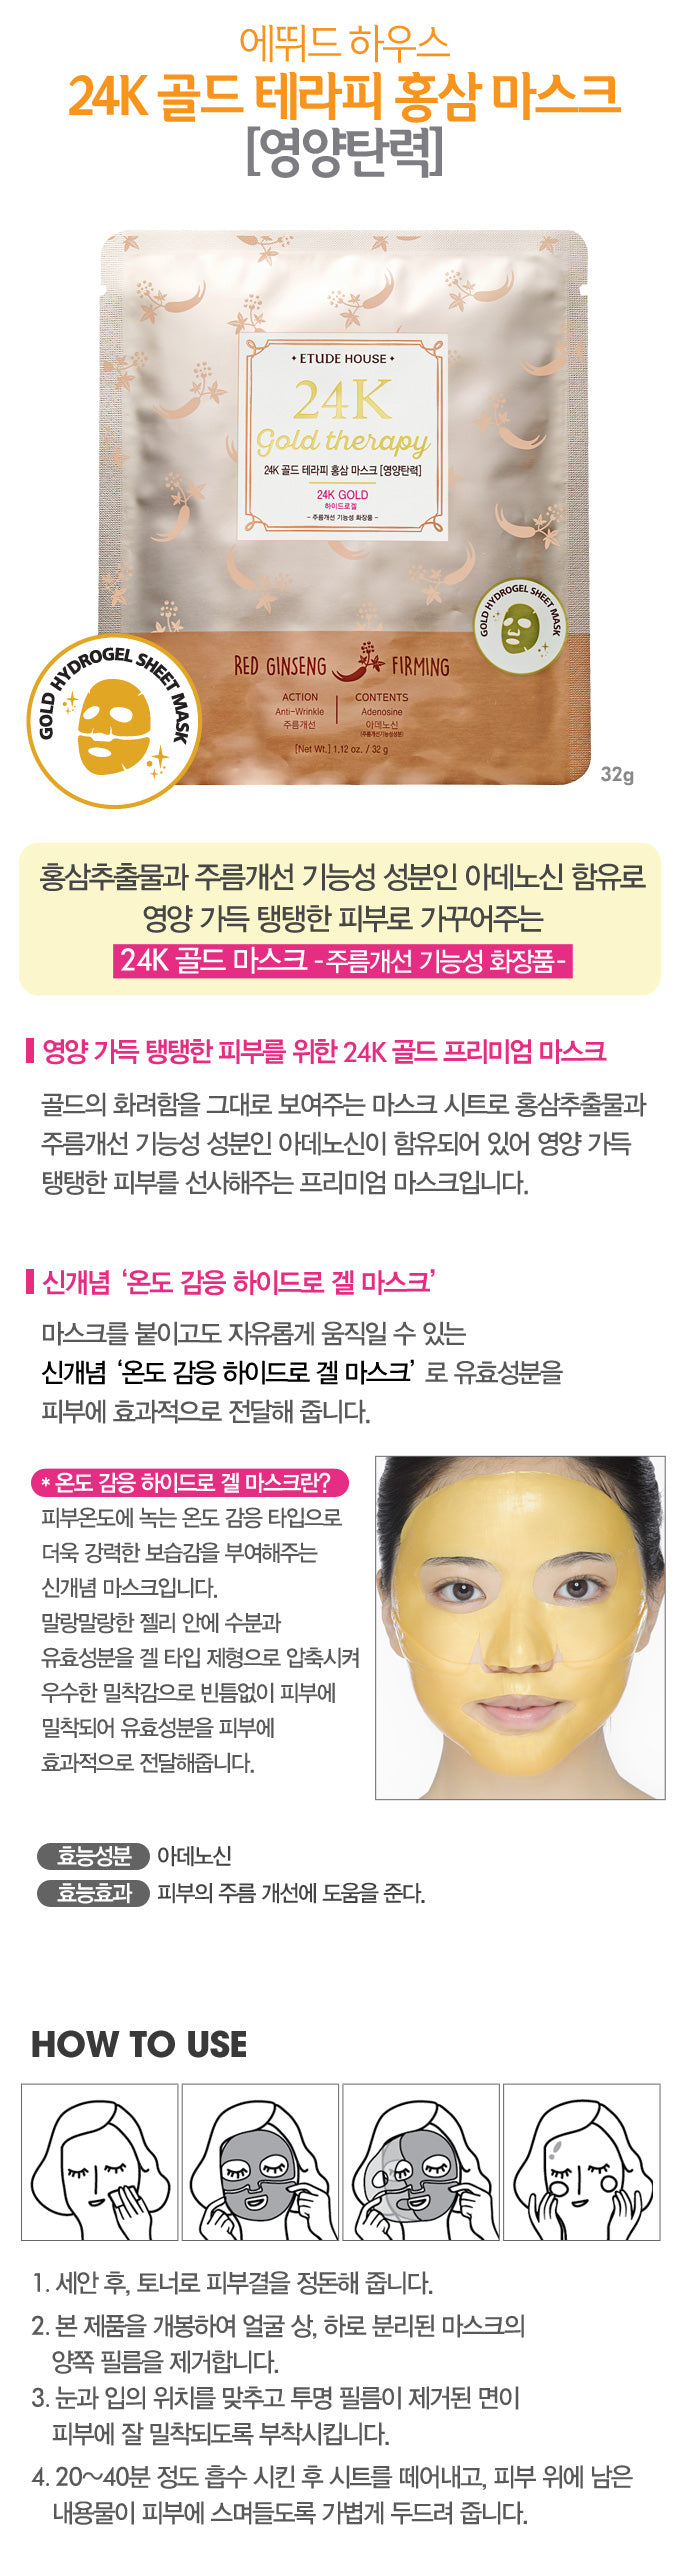 Etude House - 24K Gold Therapy Red Ginseng Mask